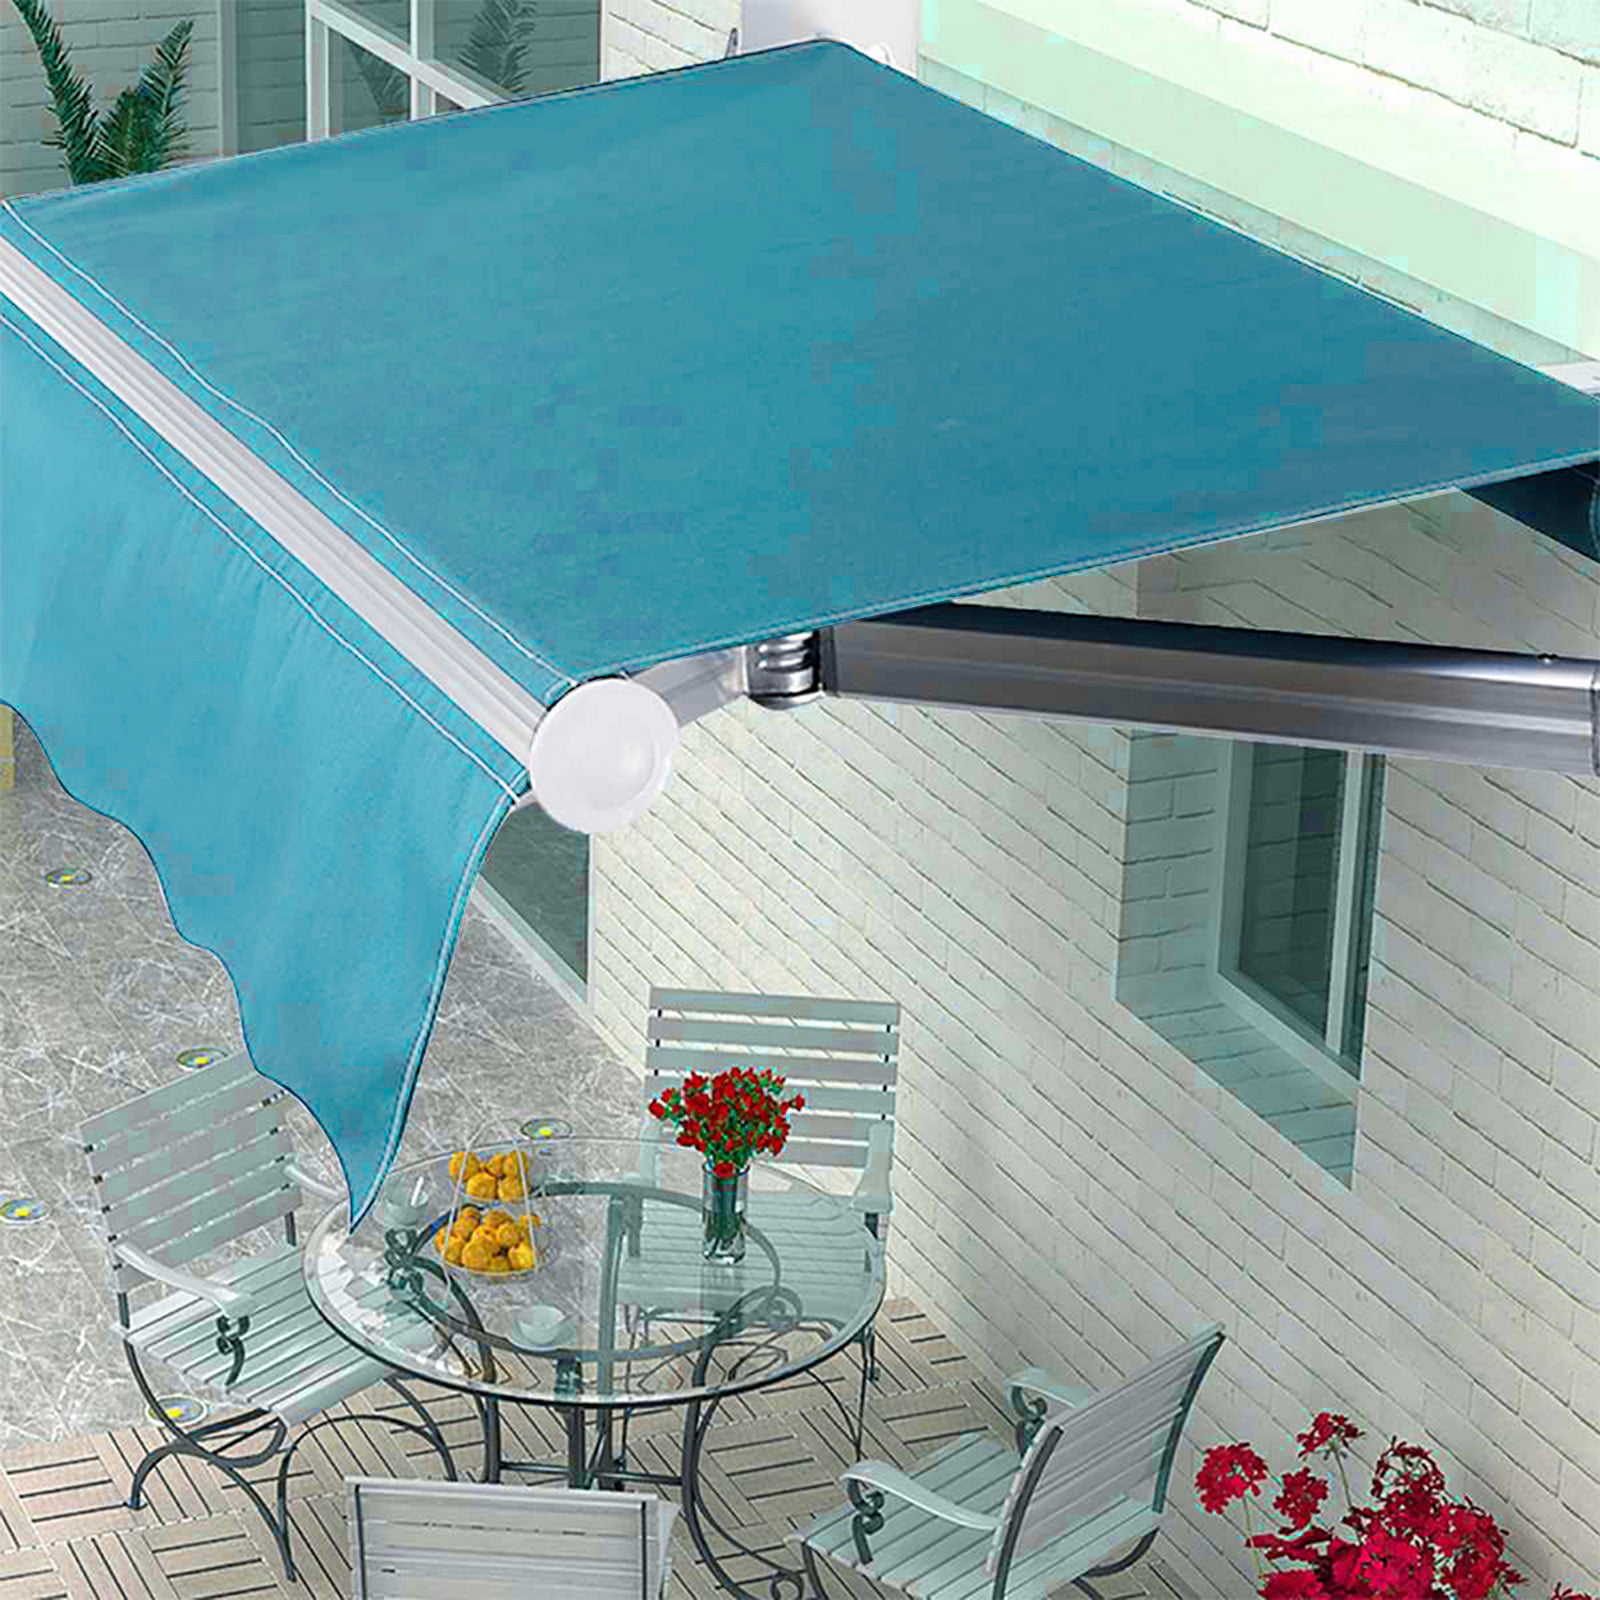 3.5x2.5m Retractable Manual Awning Canopy Patio Sun Shade Shelter Yellow Stripe 